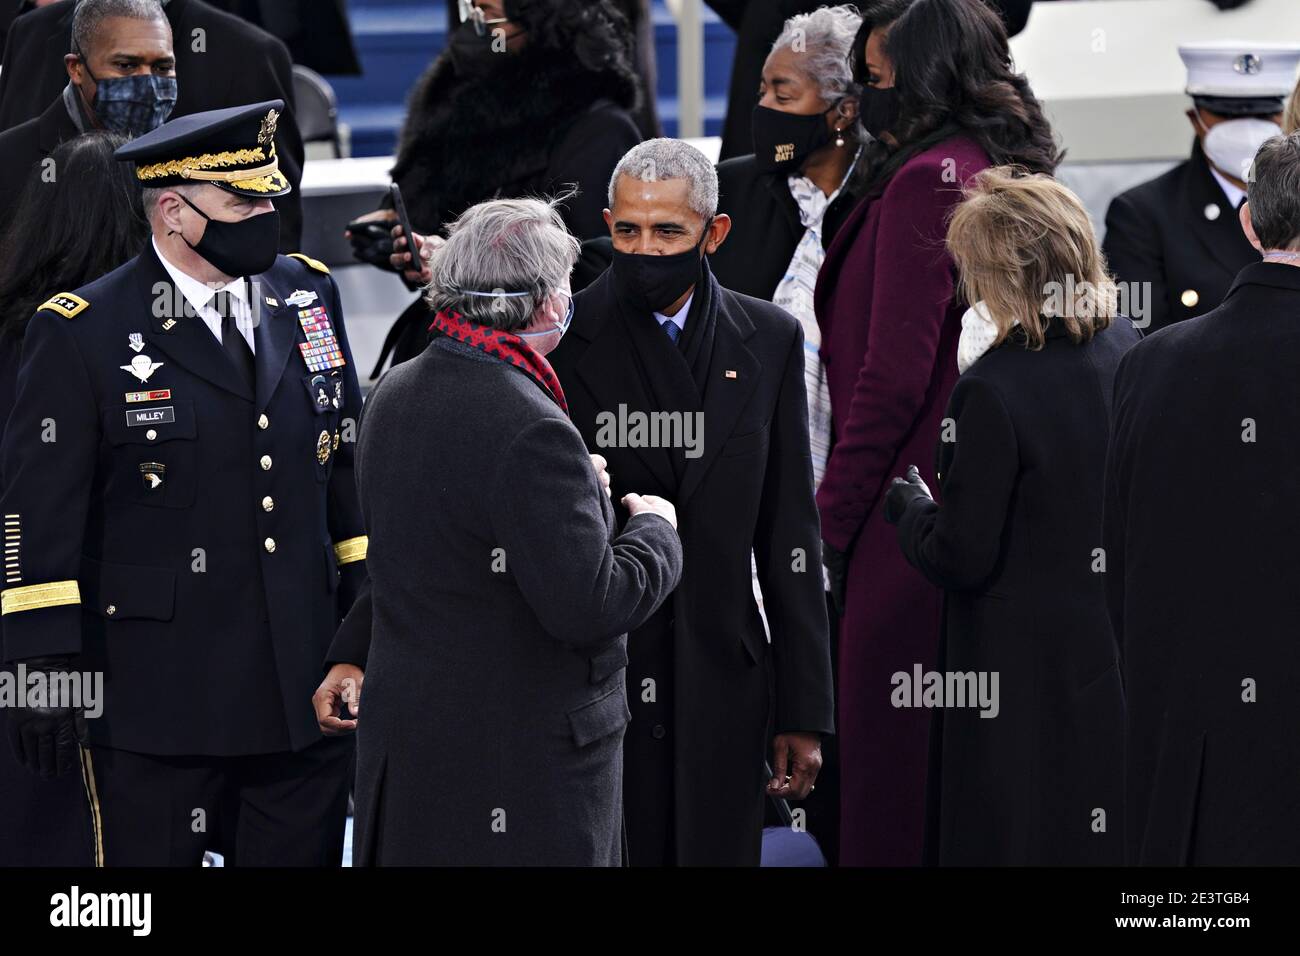 Former U.S. President Barack Obama attends the 59th presidential inauguration in Washington, DC, U.S., on Wednesday, Jan. 20, 2021. Biden will propose a broad immigration overhaul on his first day as president, including a shortened pathway to U.S. citizenship for undocumented migrants - a complete reversal from Donald Trump's immigration restrictions and crackdowns, but one that faces major roadblocks in Congress. Photographer: Kevin Dietsch/UPI/Bloomberg/MediaPunch Stock Photo